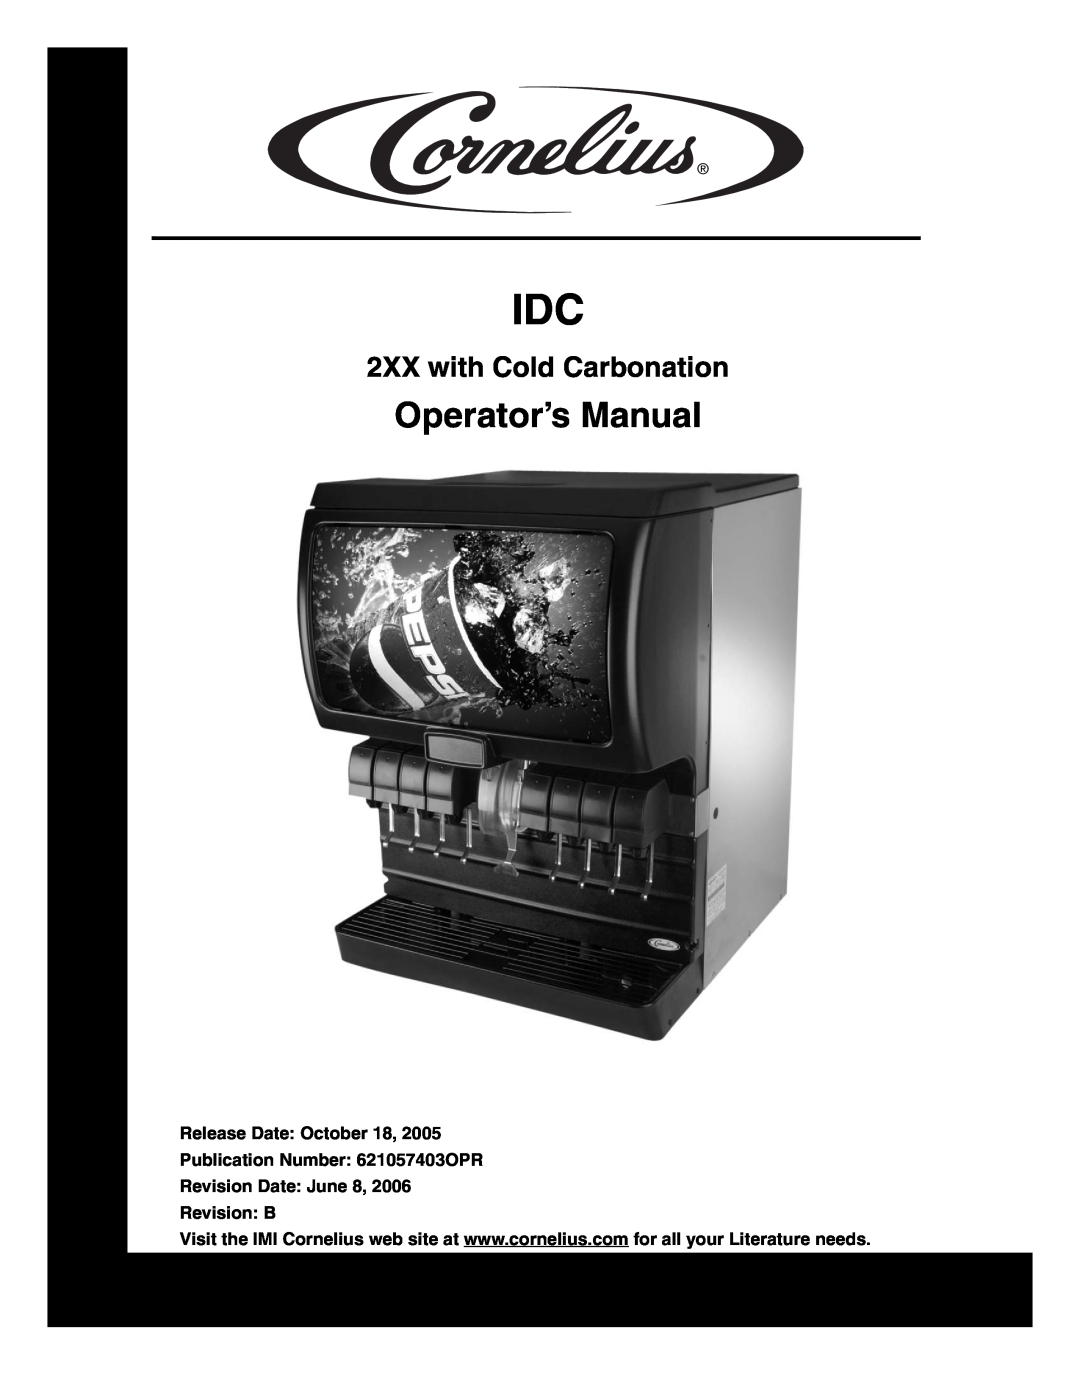 Cornelius IDC 2XX manual Operator’s Manual, 2XX with Cold Carbonation, Revision Date June 8 Revision B 